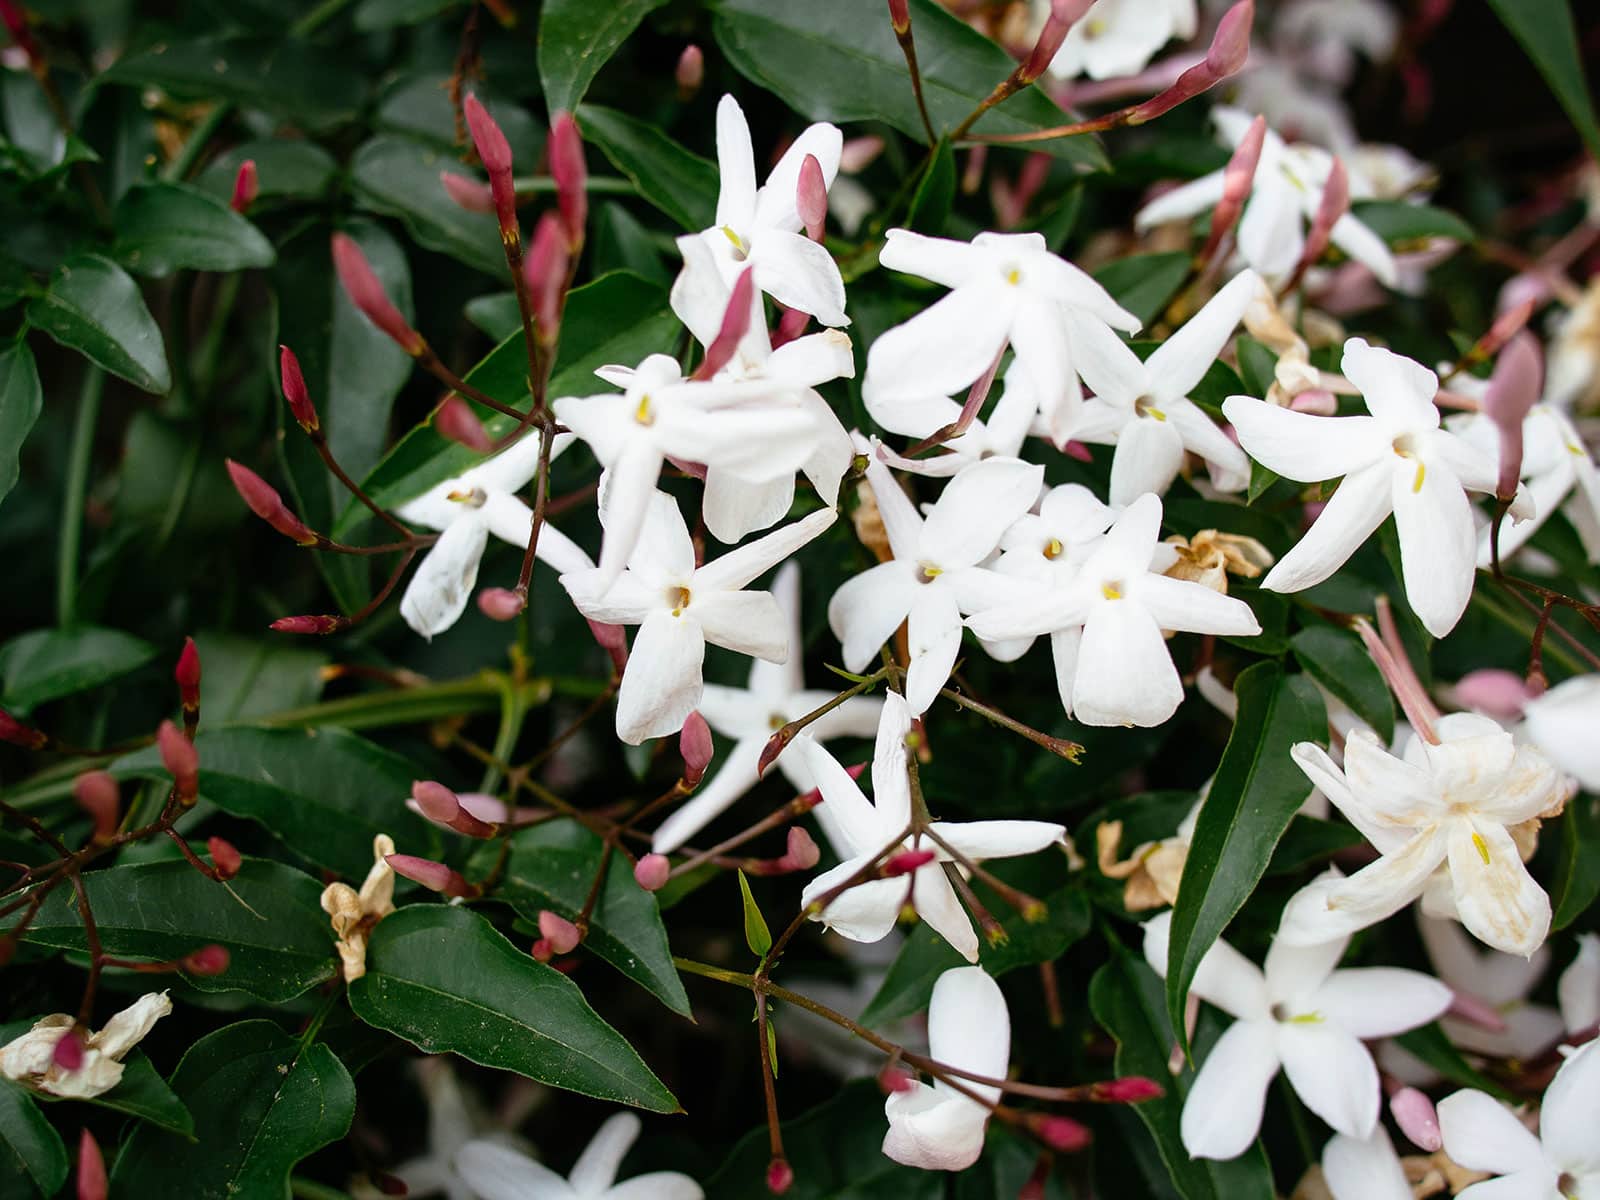 Close-up of white jasmine flowers in bloom with pink buds surrounding them